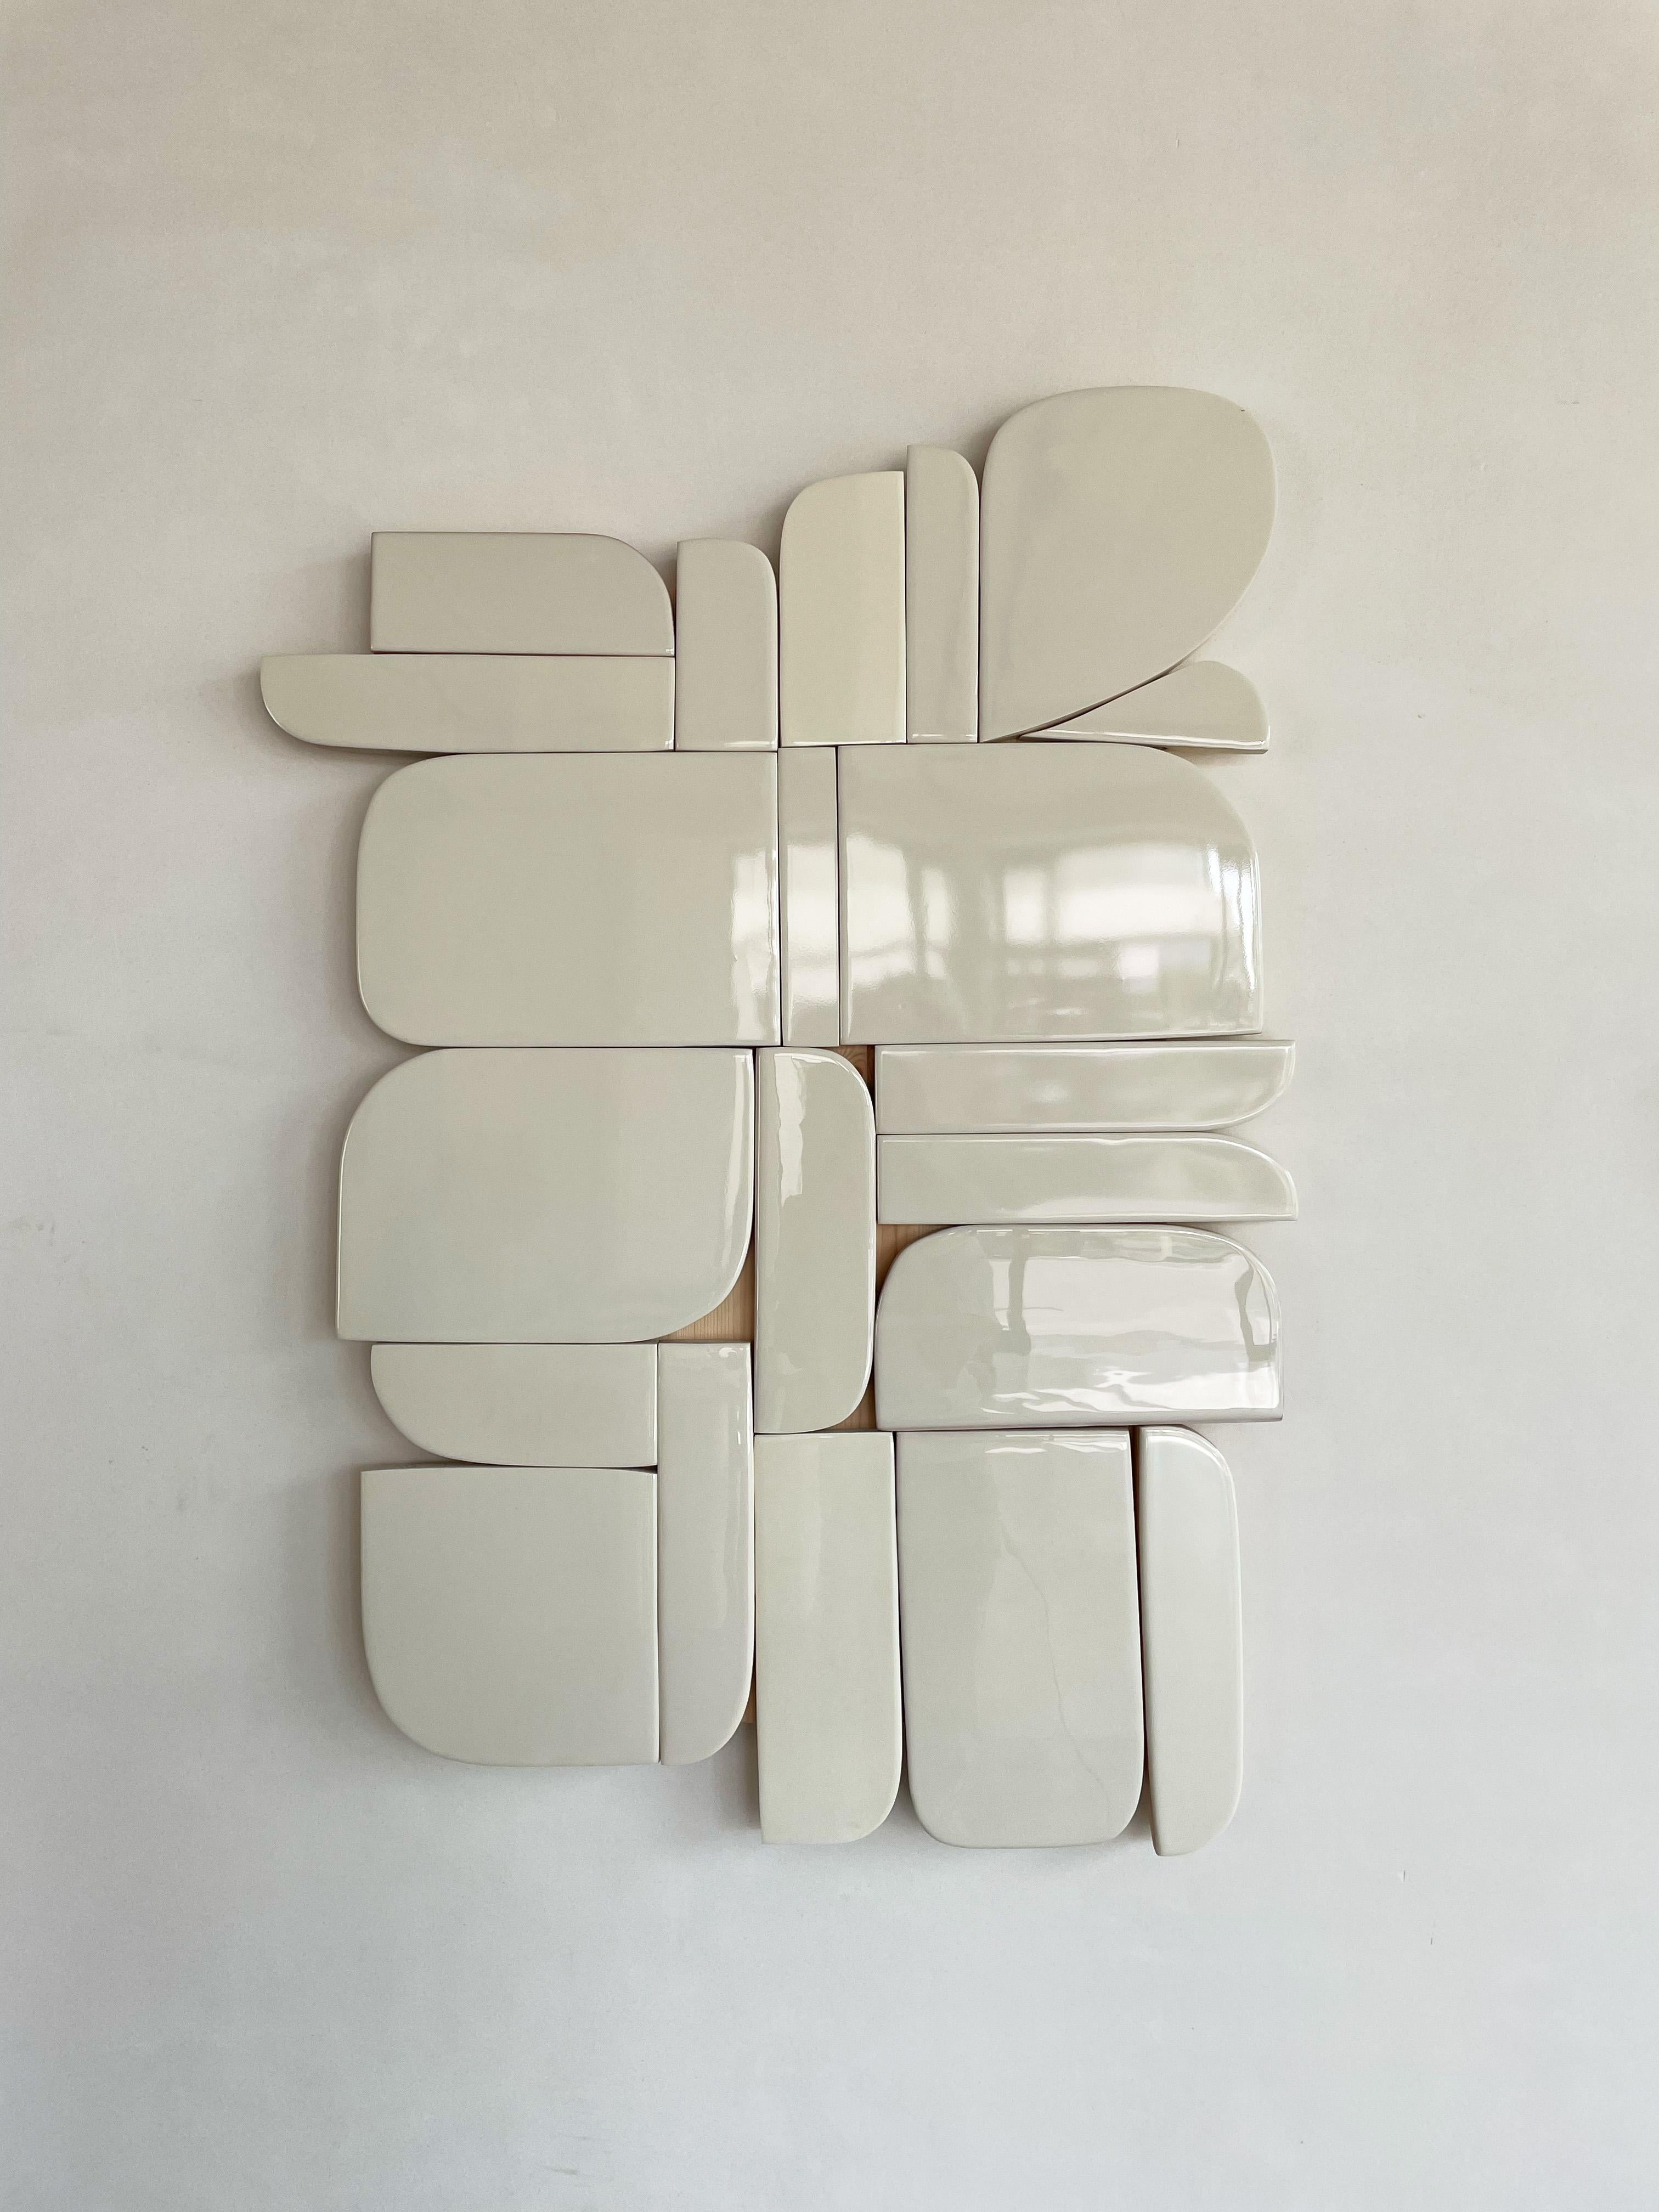 Elements #025 wall sculpture by Eline Baas
Dimensions: D 5 x W 70 x H 100 cm
Materials: Wax, Wood

STUDIO ELINE BAAS is an Amsterdam-based Interior Design studio. 

Whether it is a private home, office, restaurant, hotel or the aesthetic